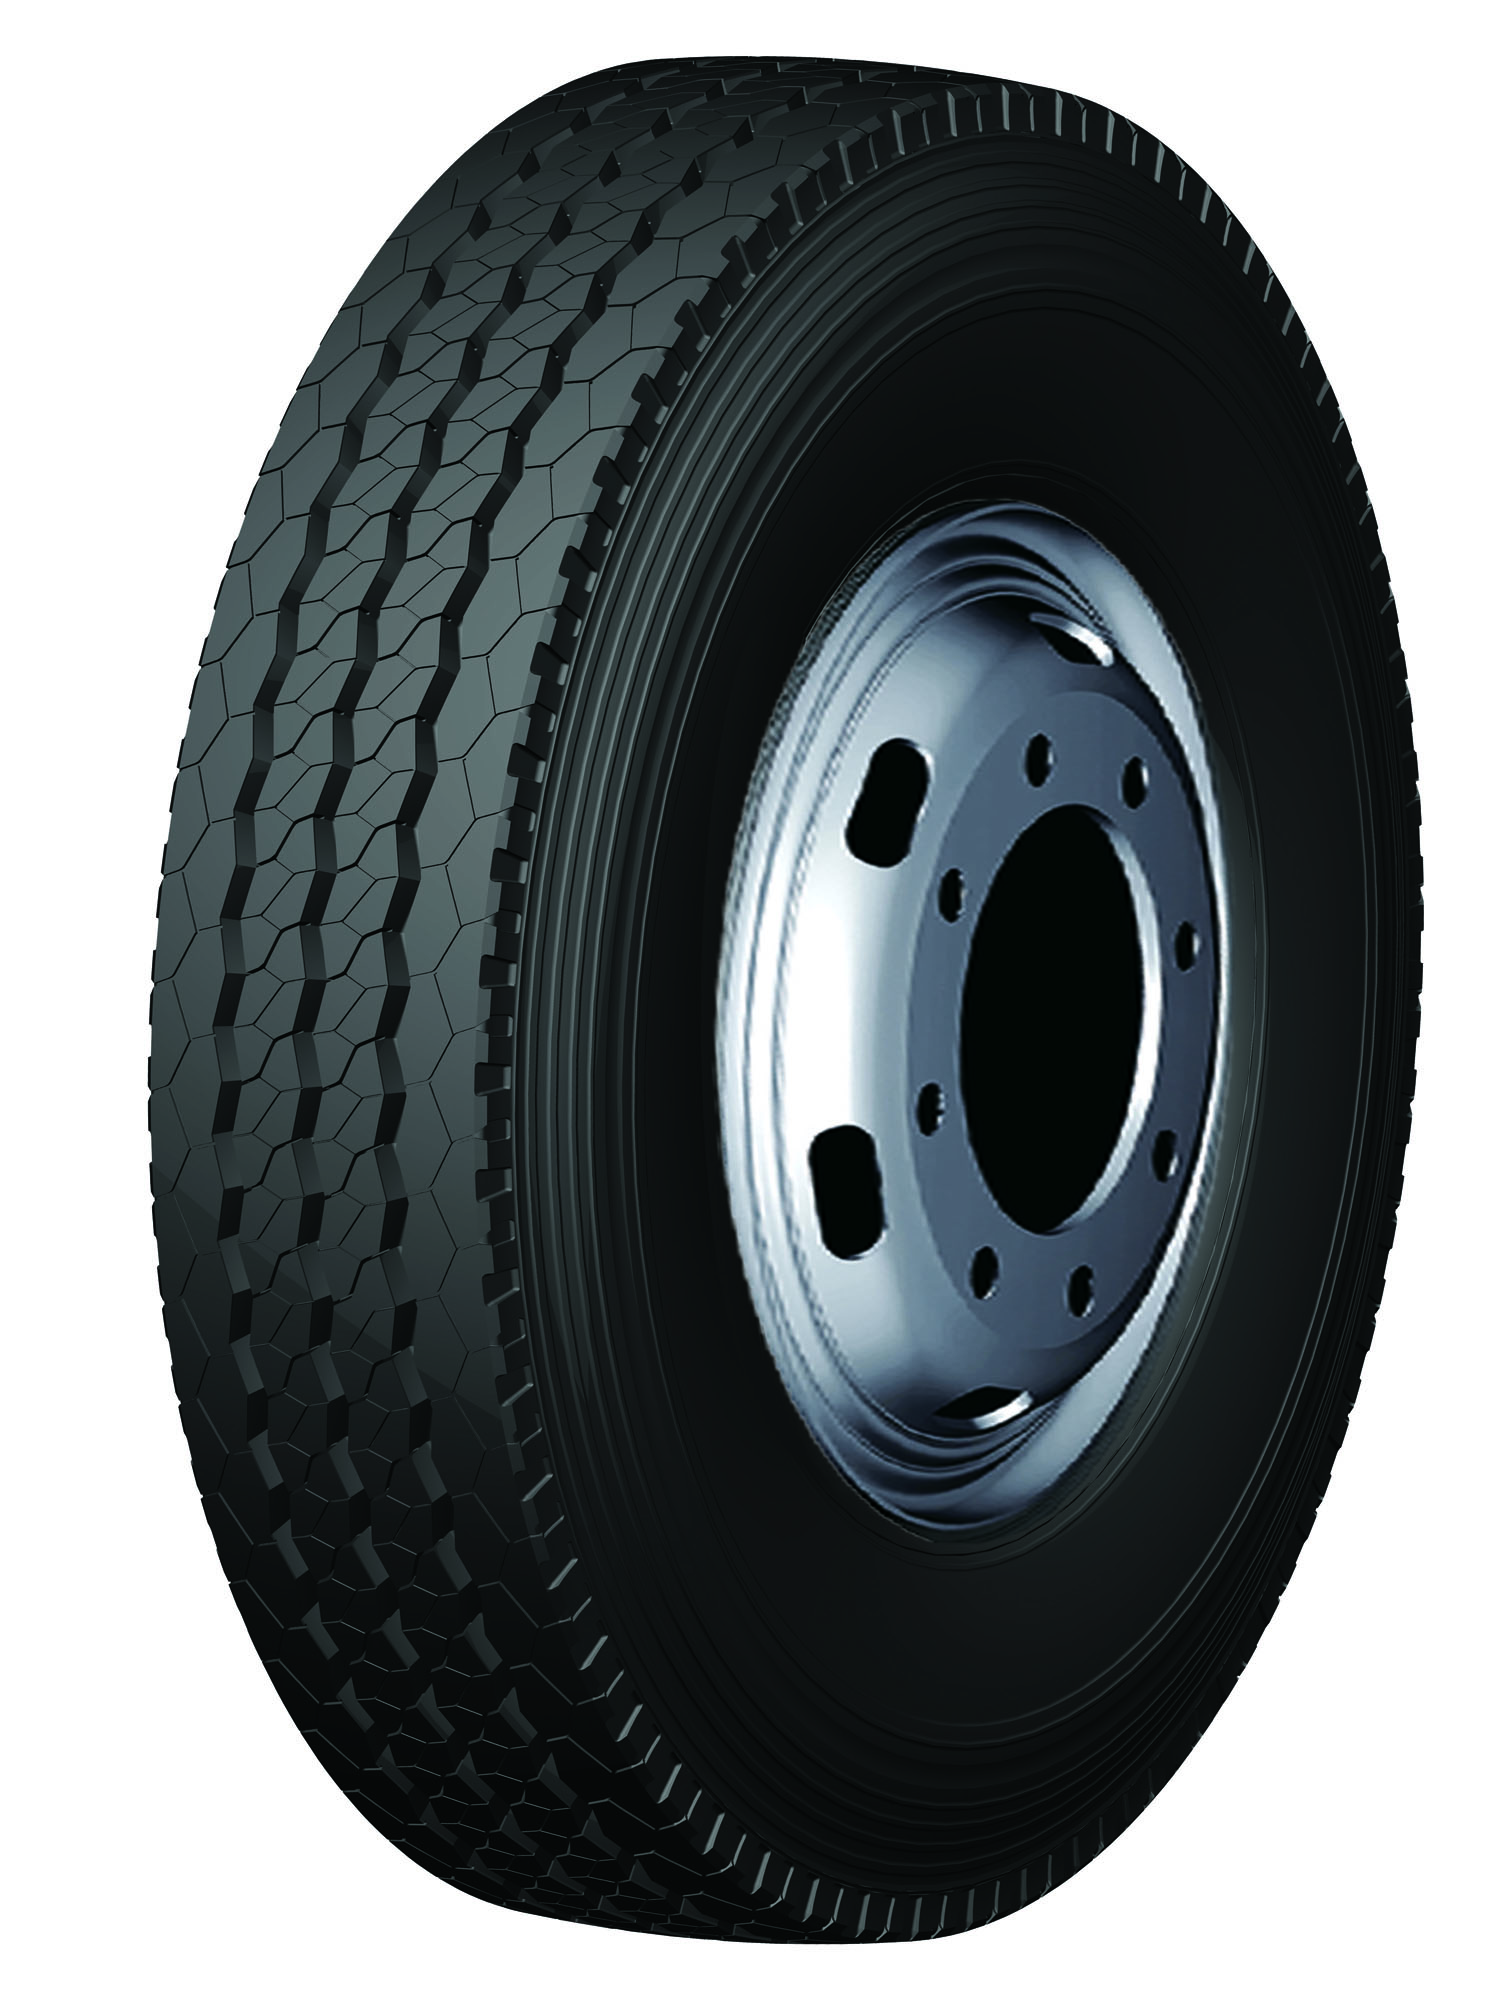 DOUBLEHAPPINESS 275/70R22.5 DR966 144/141M 16PR